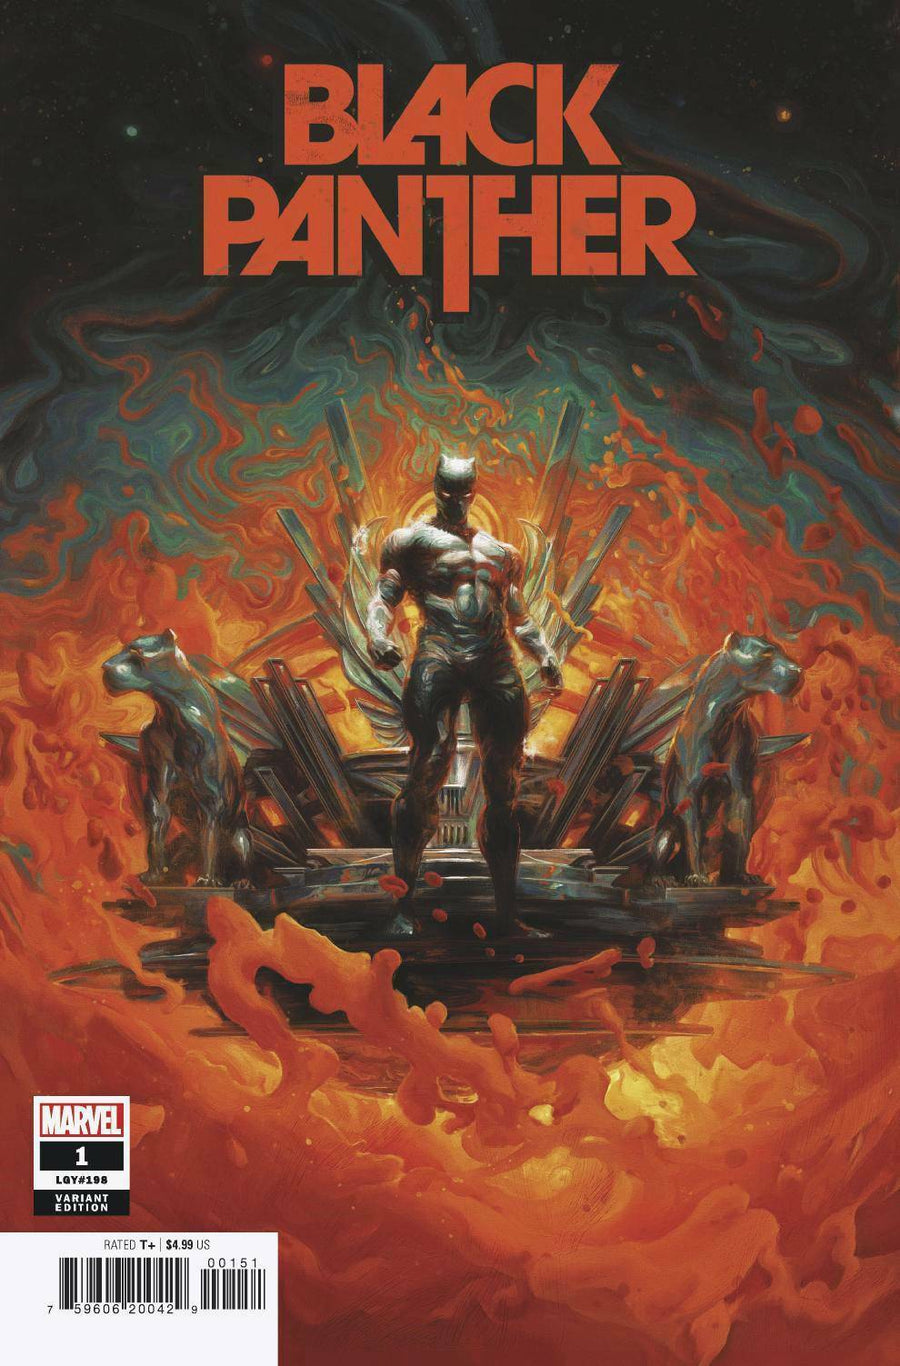 BLACK PANTHER #1 Mike Mayhew Studio Variant Cover A Trade Dress Raw and 1:25 Spratt Variant